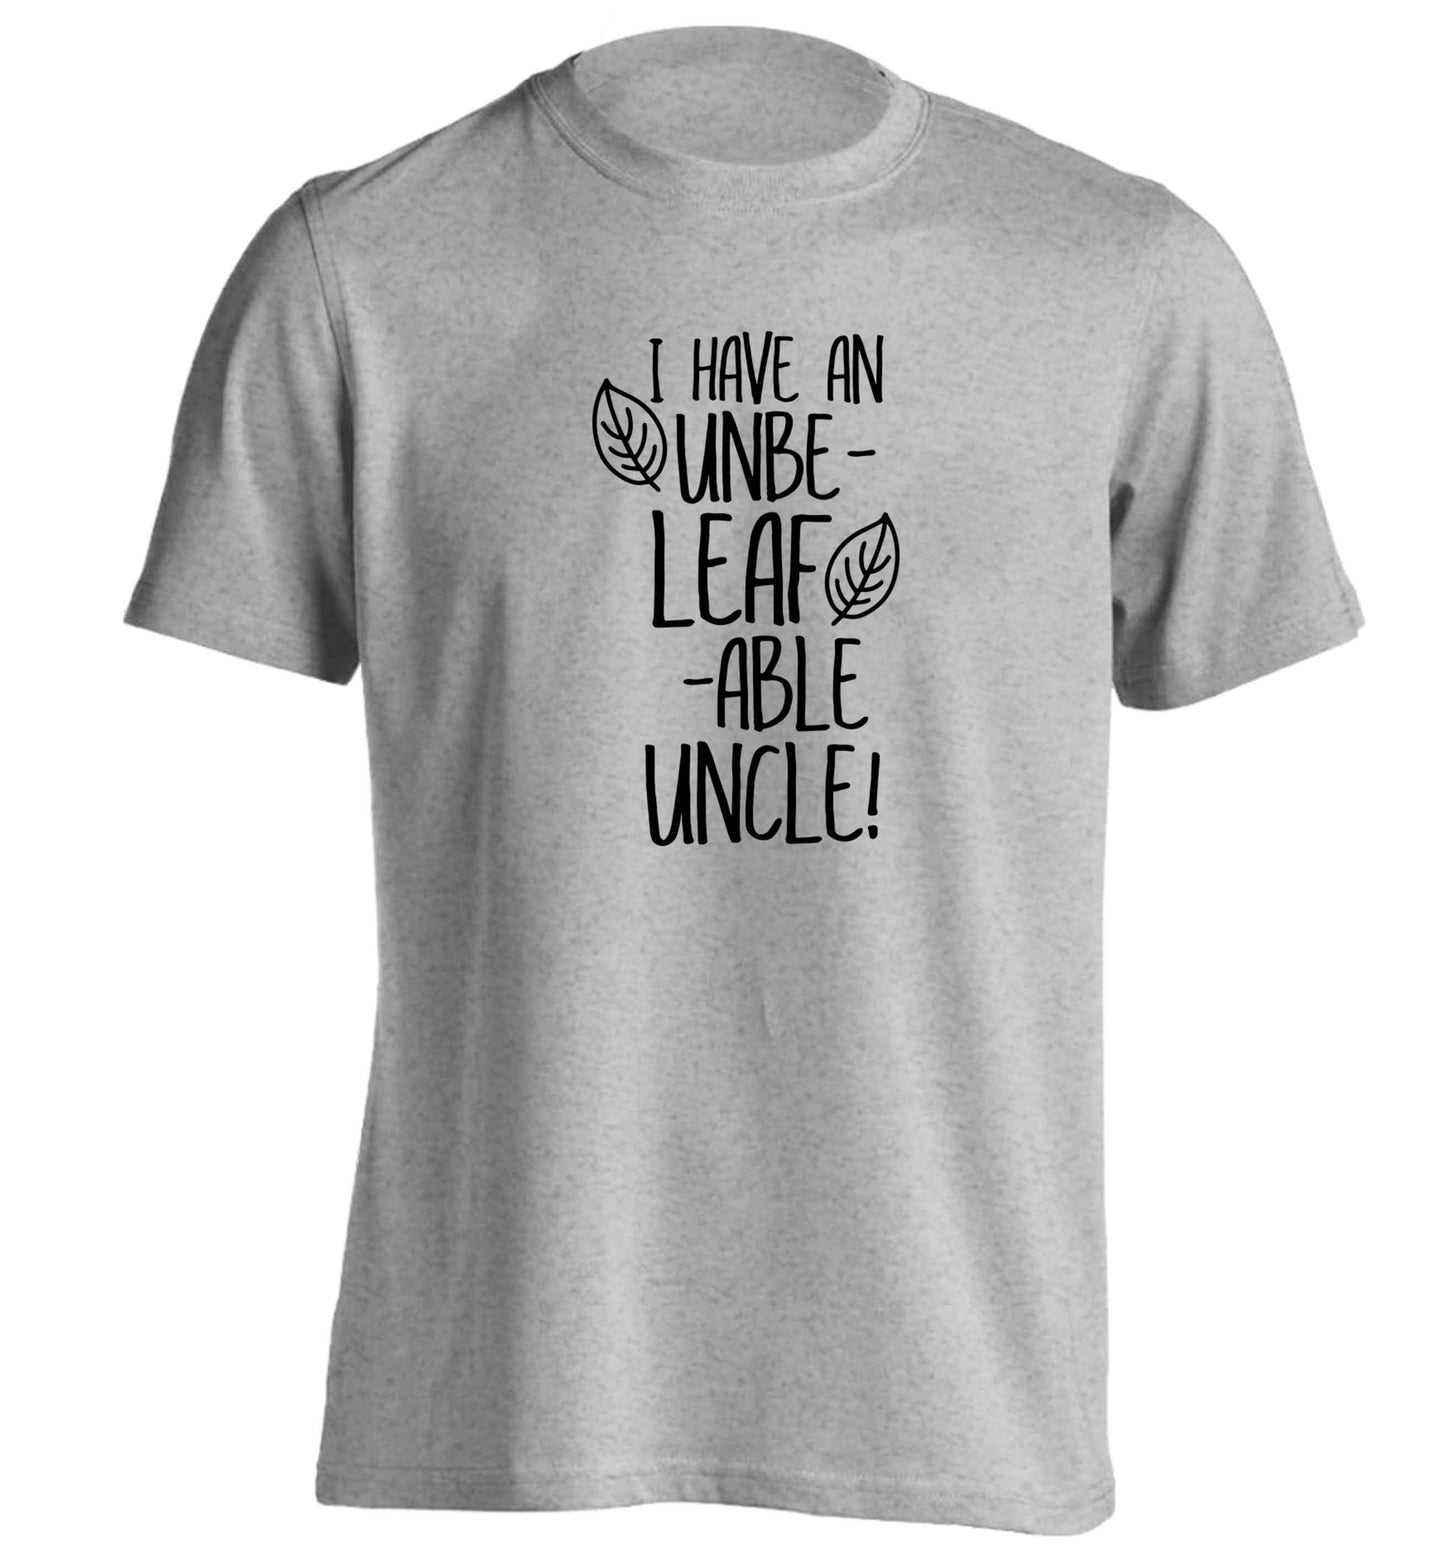 I have an unbe-leaf-able uncle adults unisex grey Tshirt 2XL